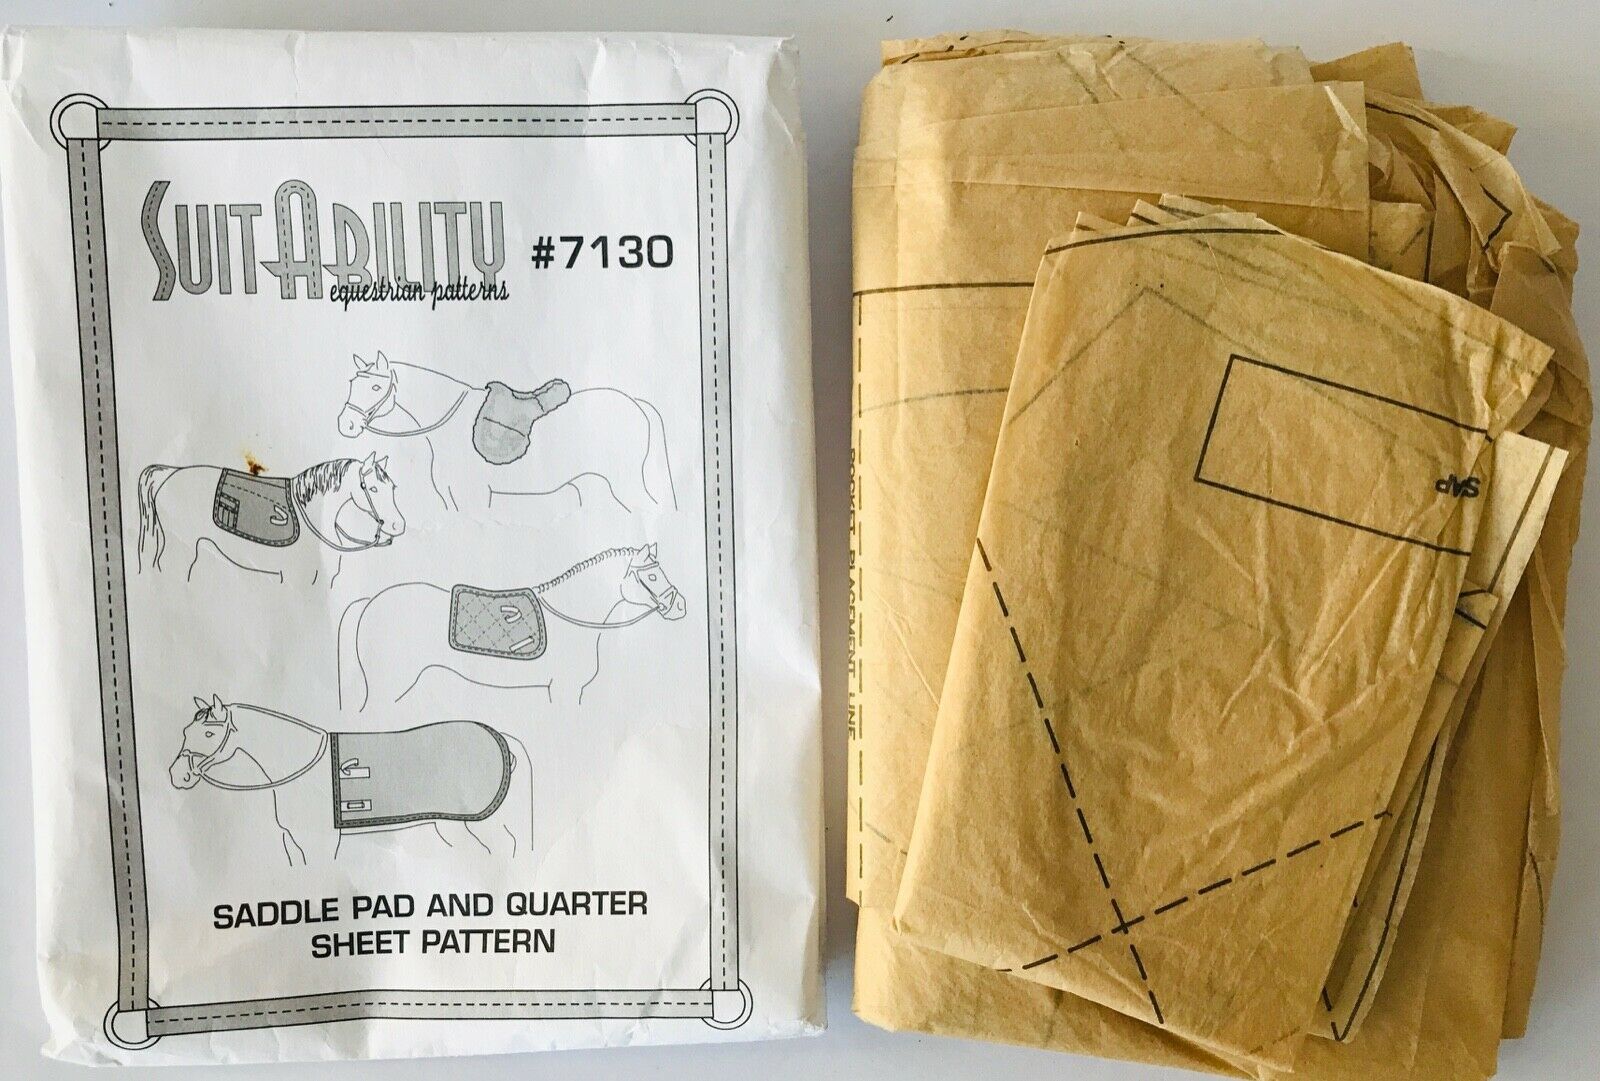 Primary image for SuitAbility Equestrian Sewing Pattern 7130 Saddle Pad & Quarter Sheet for Horses